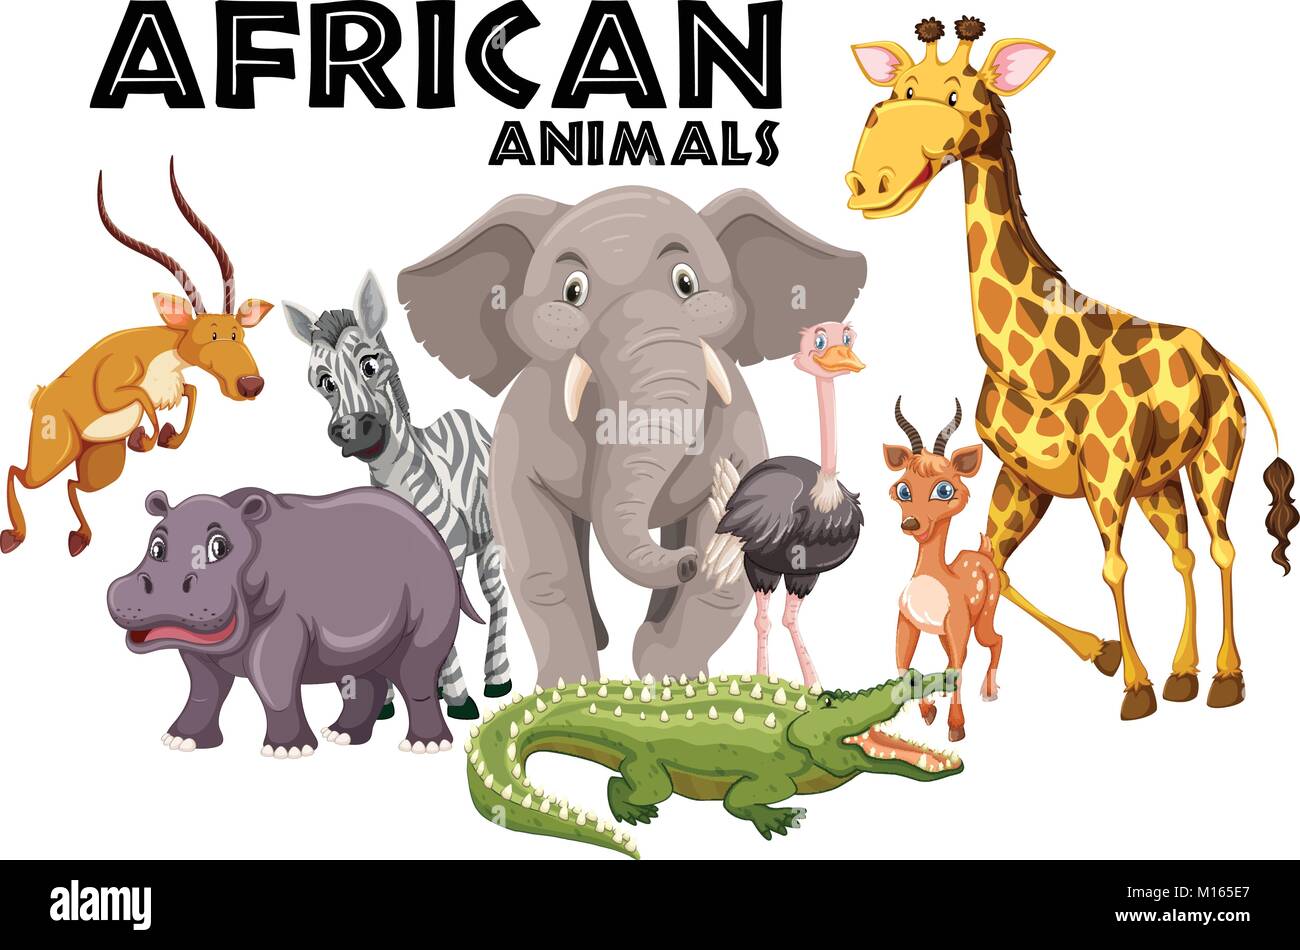 African animals on white background illustration Stock Vector